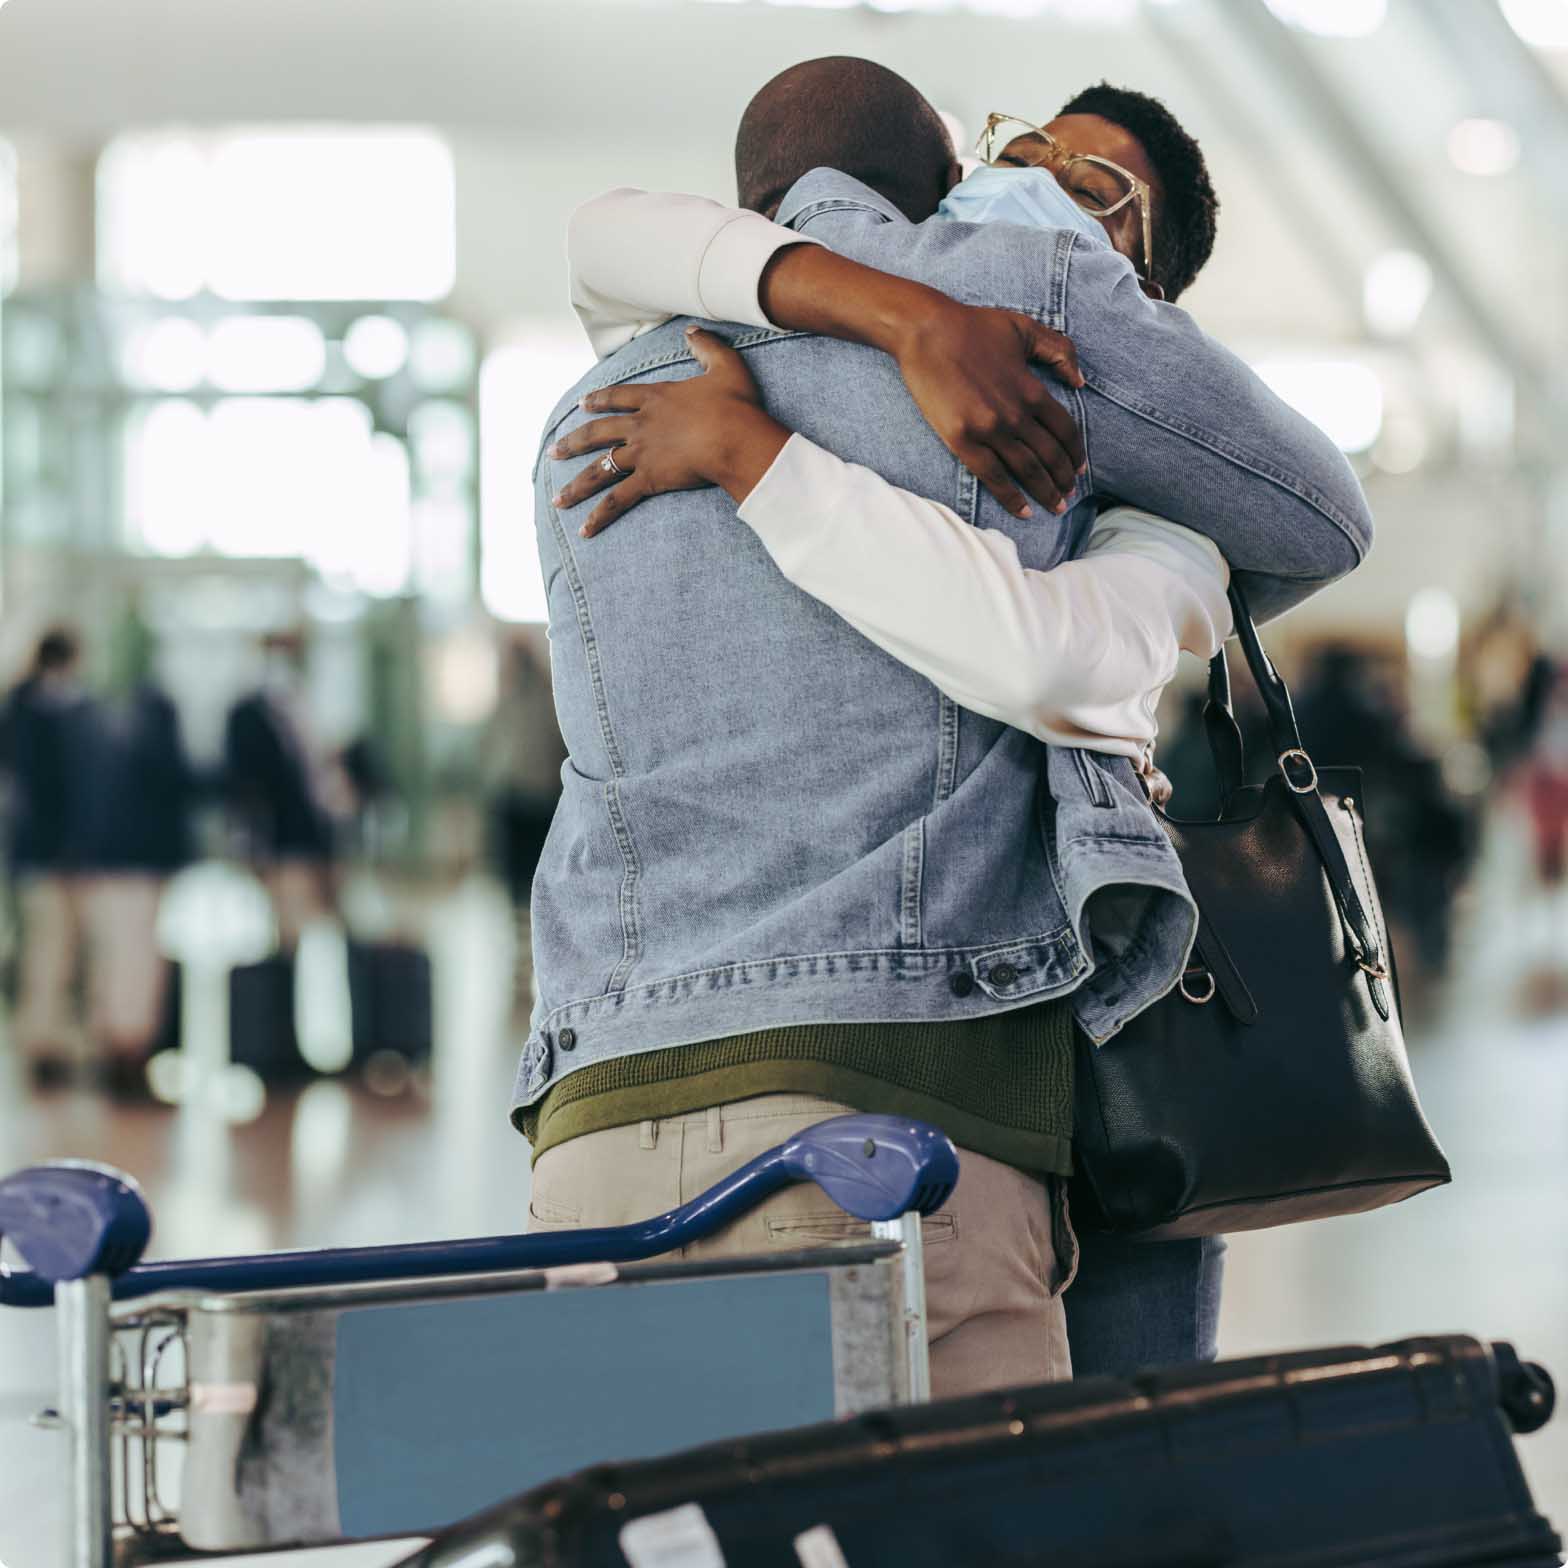 airport_embrace-at-airport_728x728